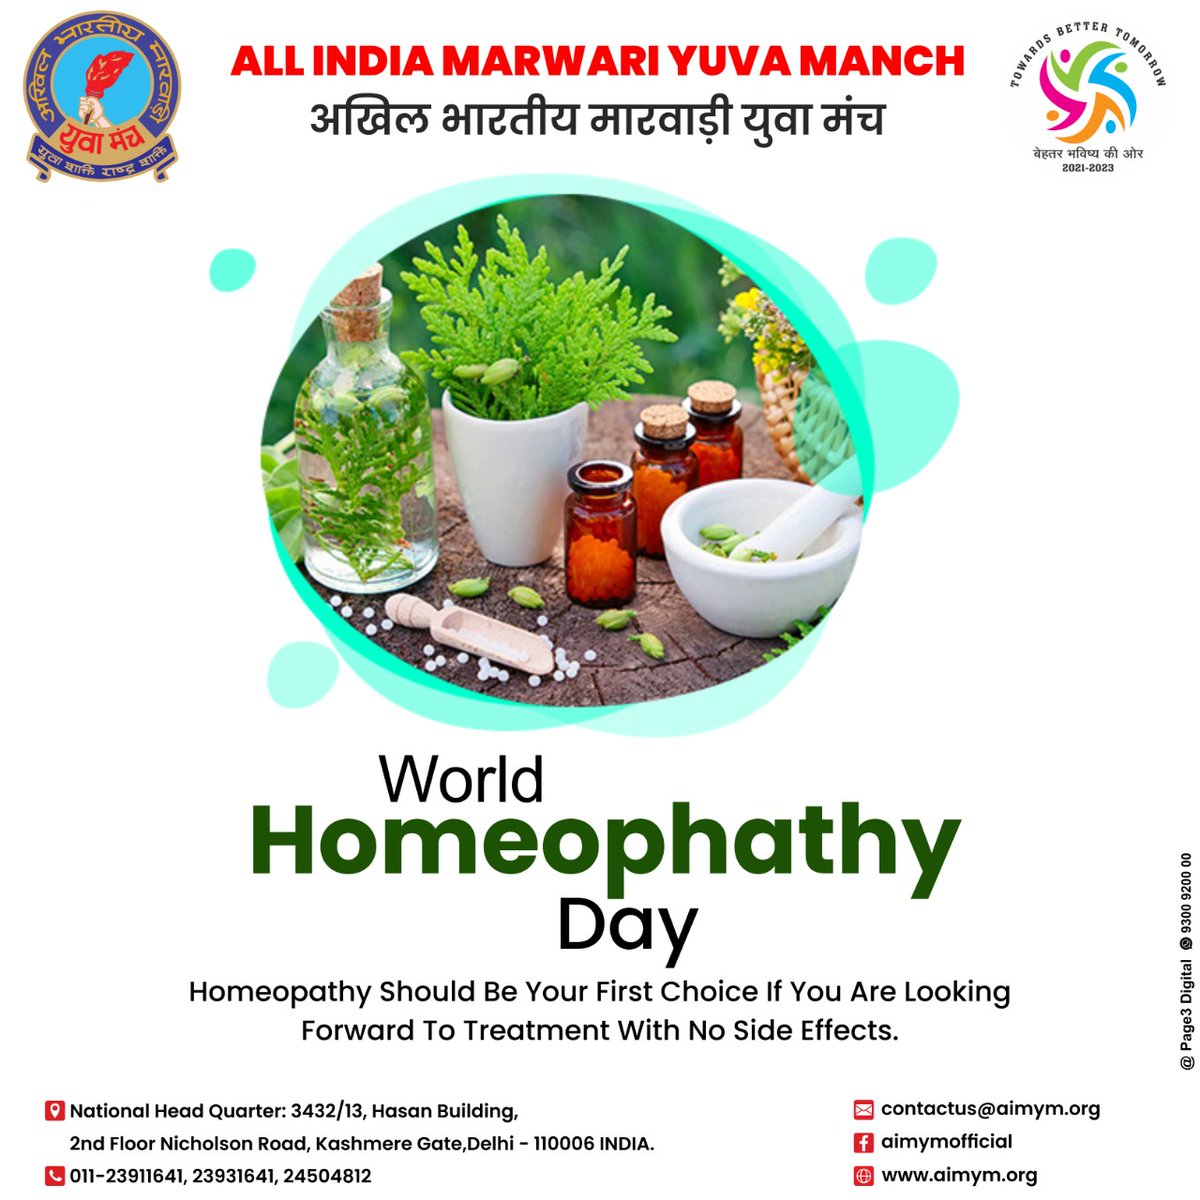 Homeopathy should be your first choice if you are looking forward to treatment with no side effects.

World Homeopathy Day
#worldhomeopathyday #worldhomeopathyday2022 #homeopathyday #homeopathy #homeopathyday2022 #homeopathyworks #homeopathyheals #homeopathyrocks #homeopathytreat